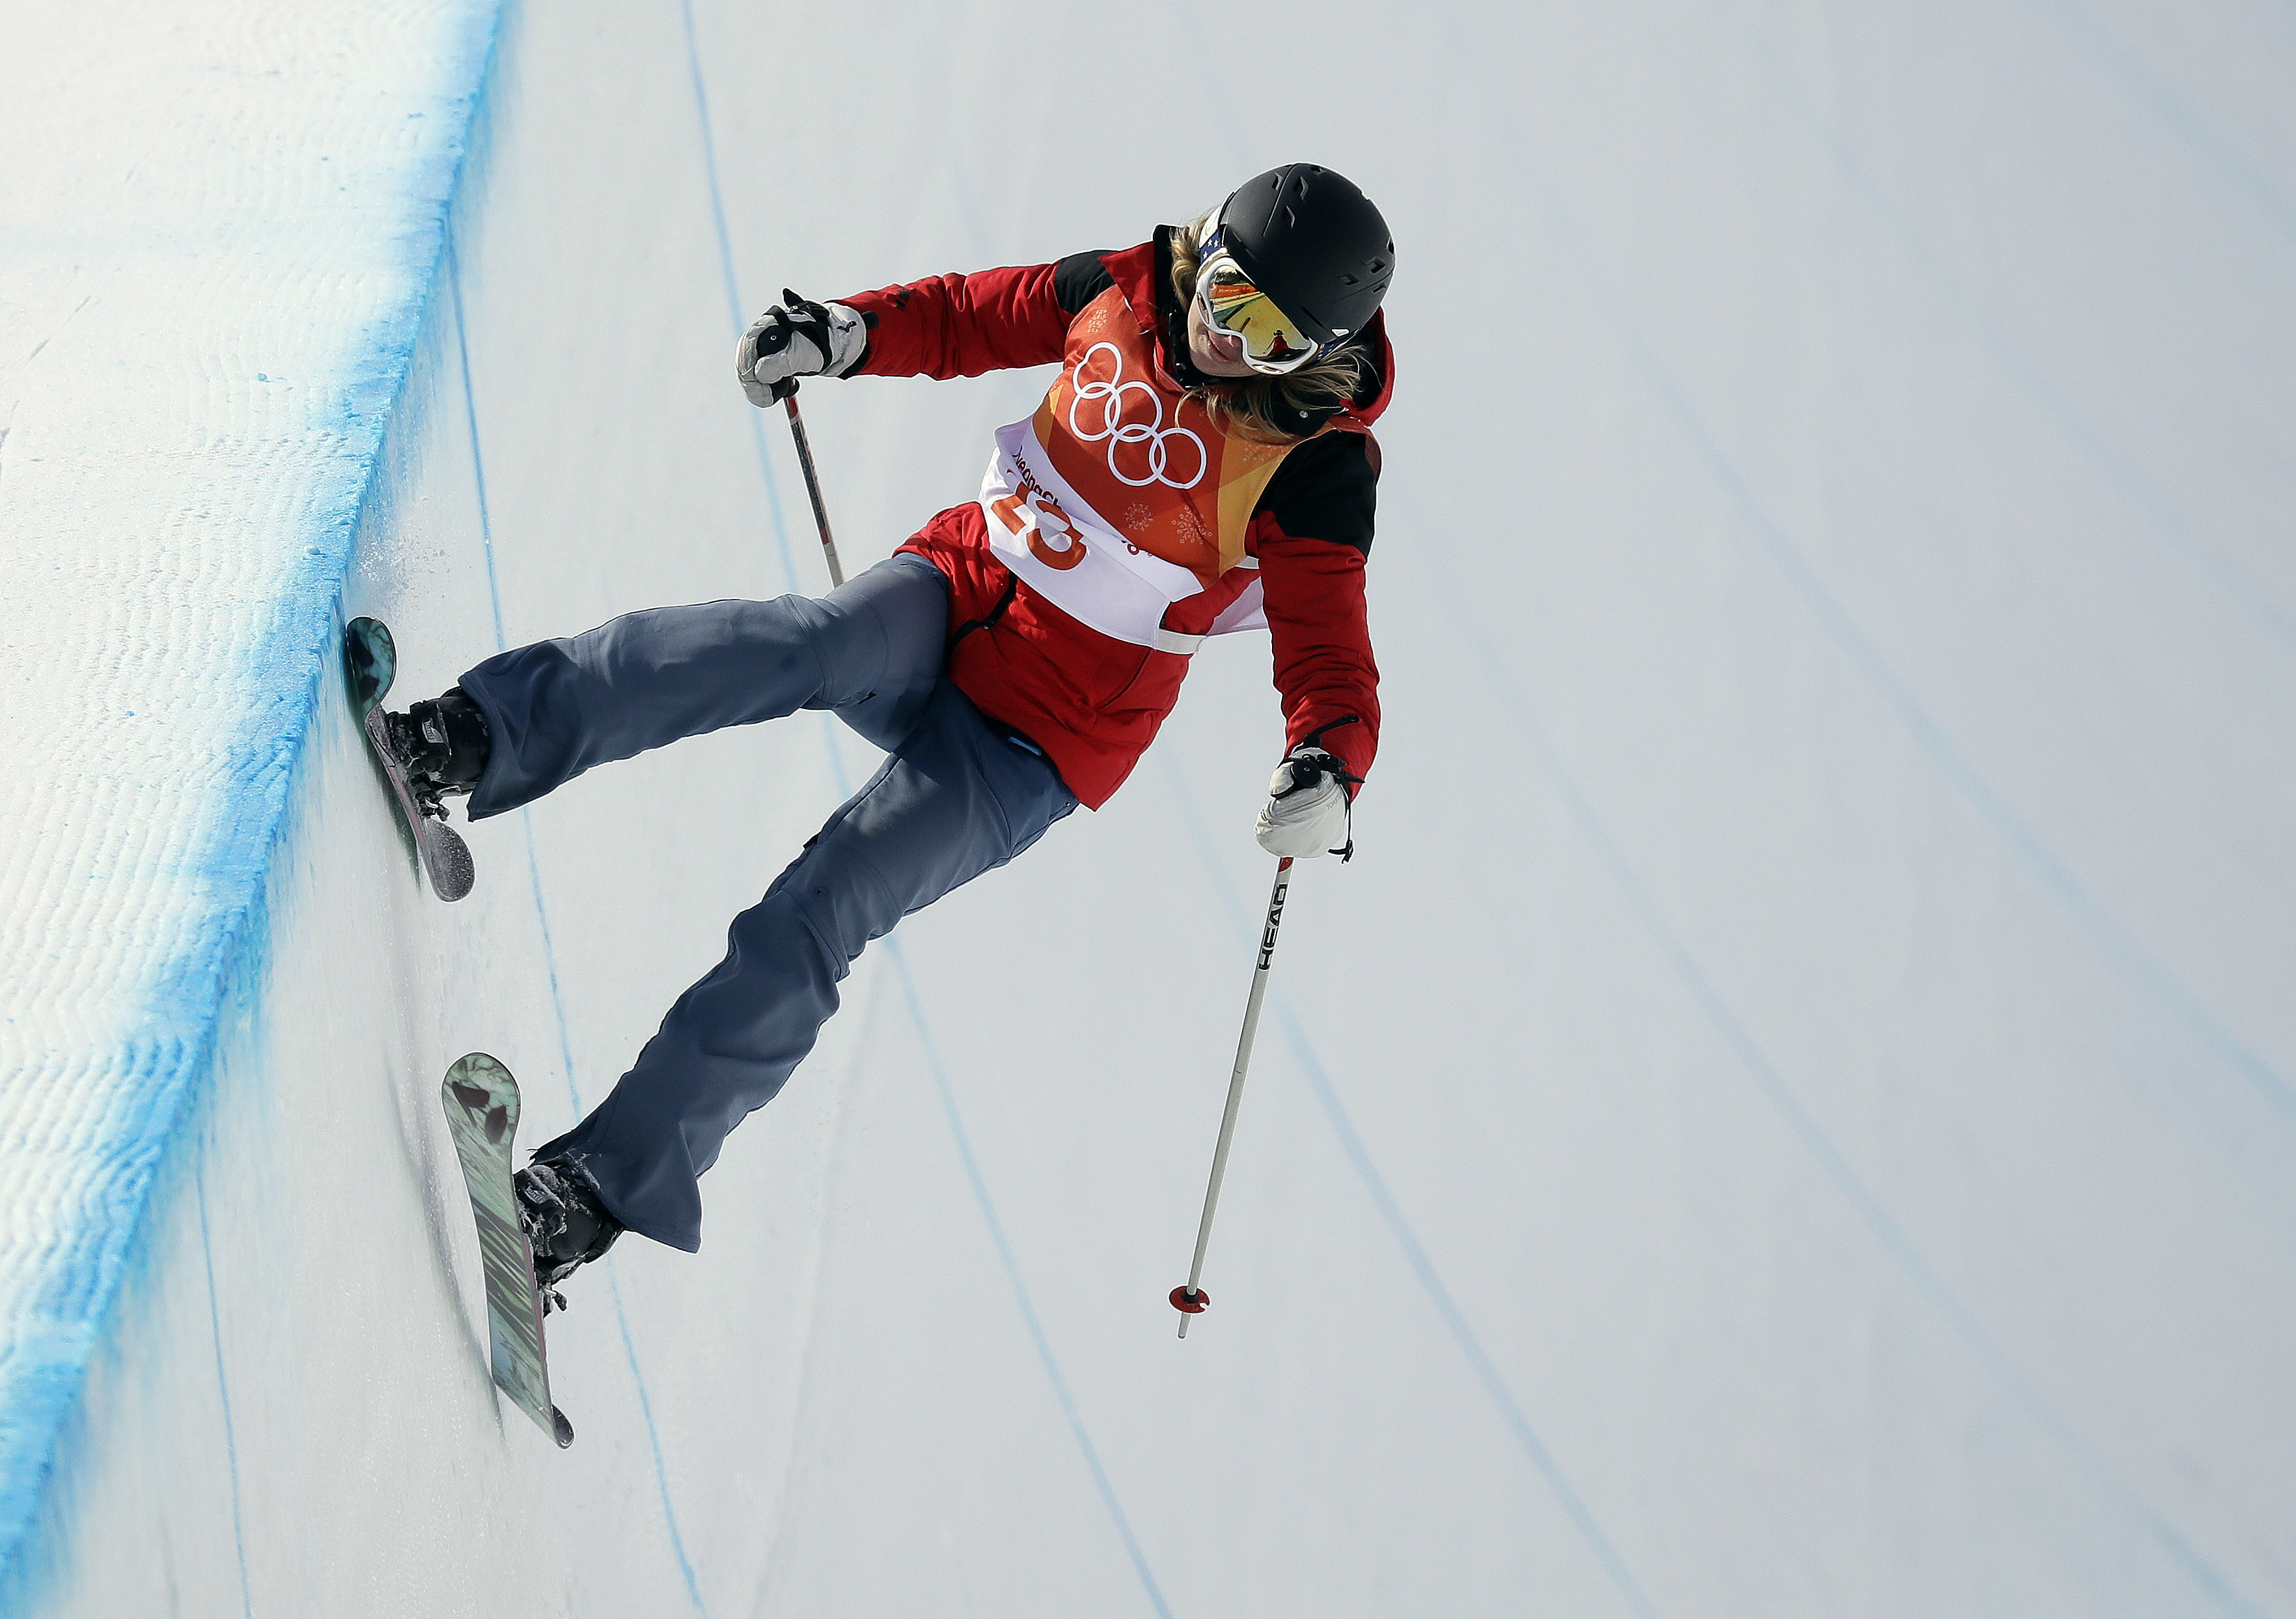 How a skier with no tricks made it to the Olympic halfpipe